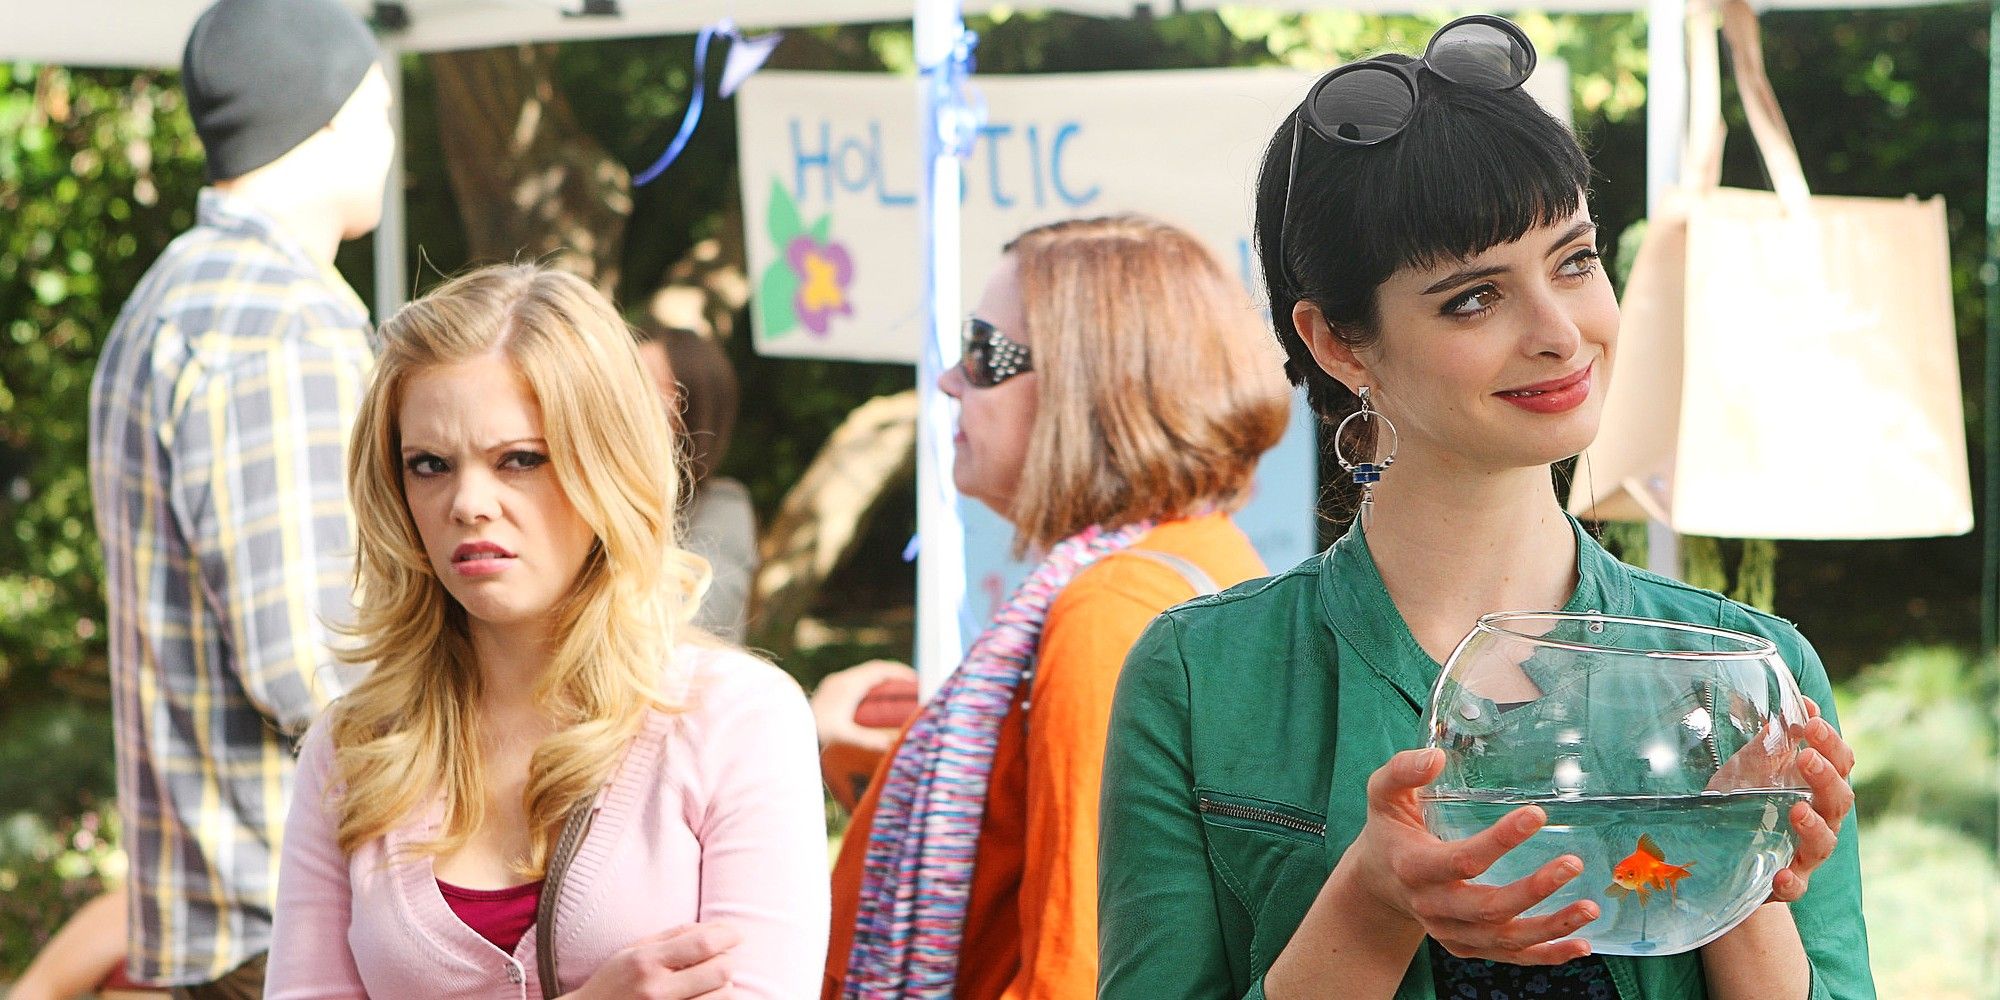 June Colbern and Chloe shopping at an outdoor market in Don't Trust the B in apartment 23